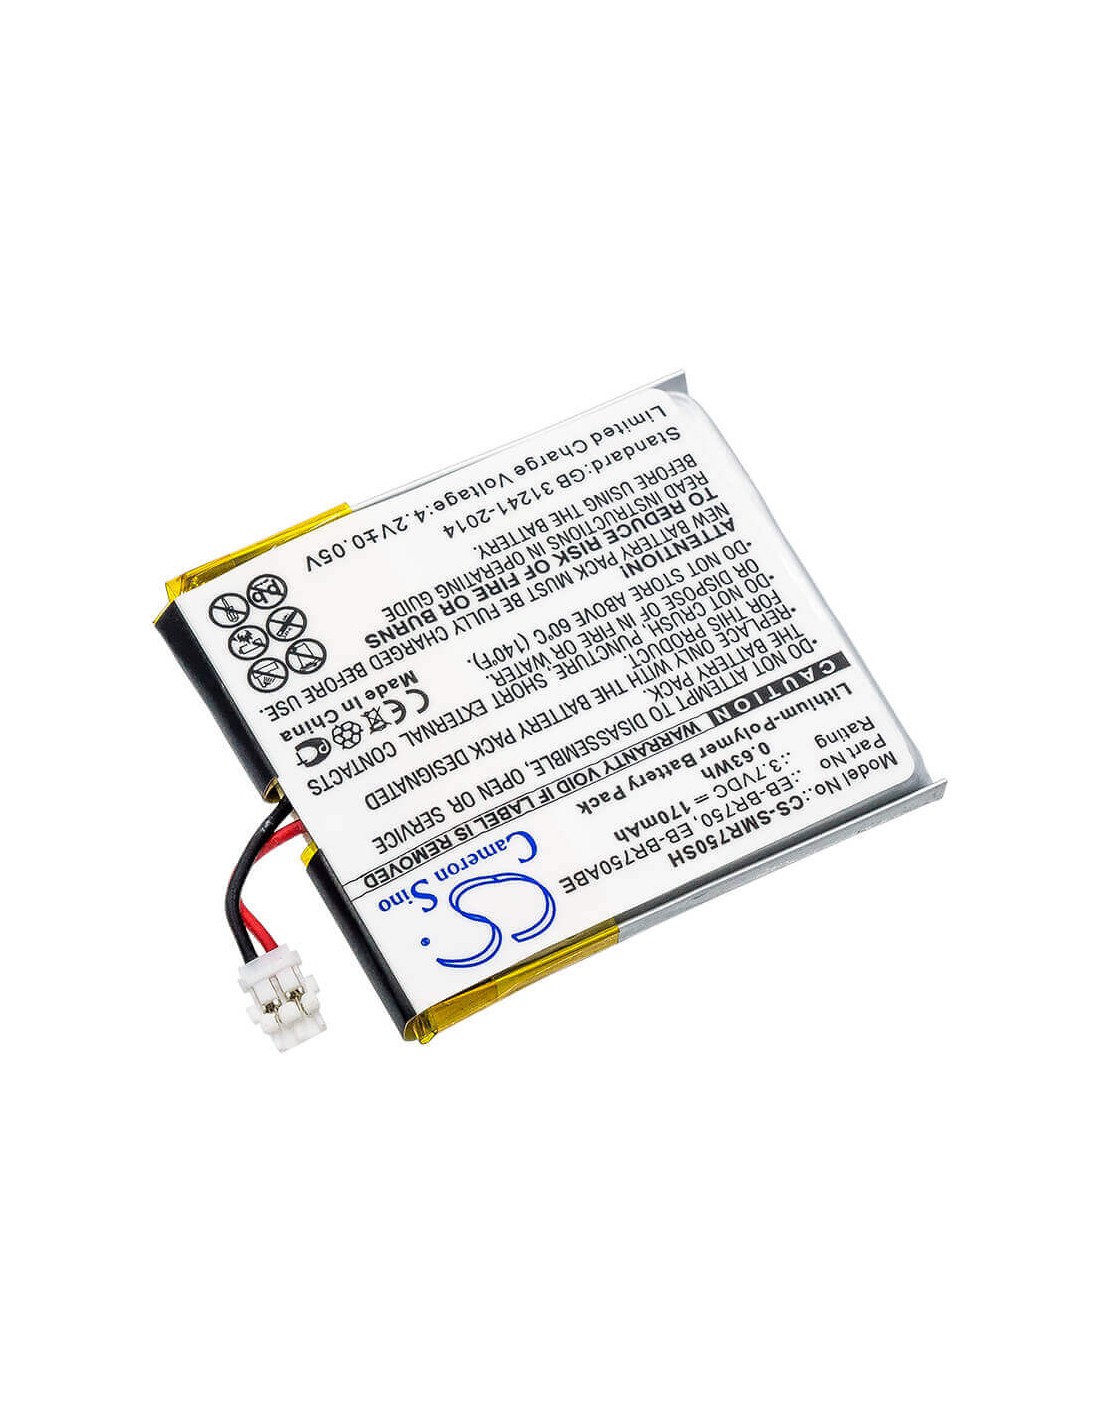 Battery for Samsung, Galaxy Gear S R750, only replaces Eb-br750 version battery 3.7V, 170mAh - 0.63Wh